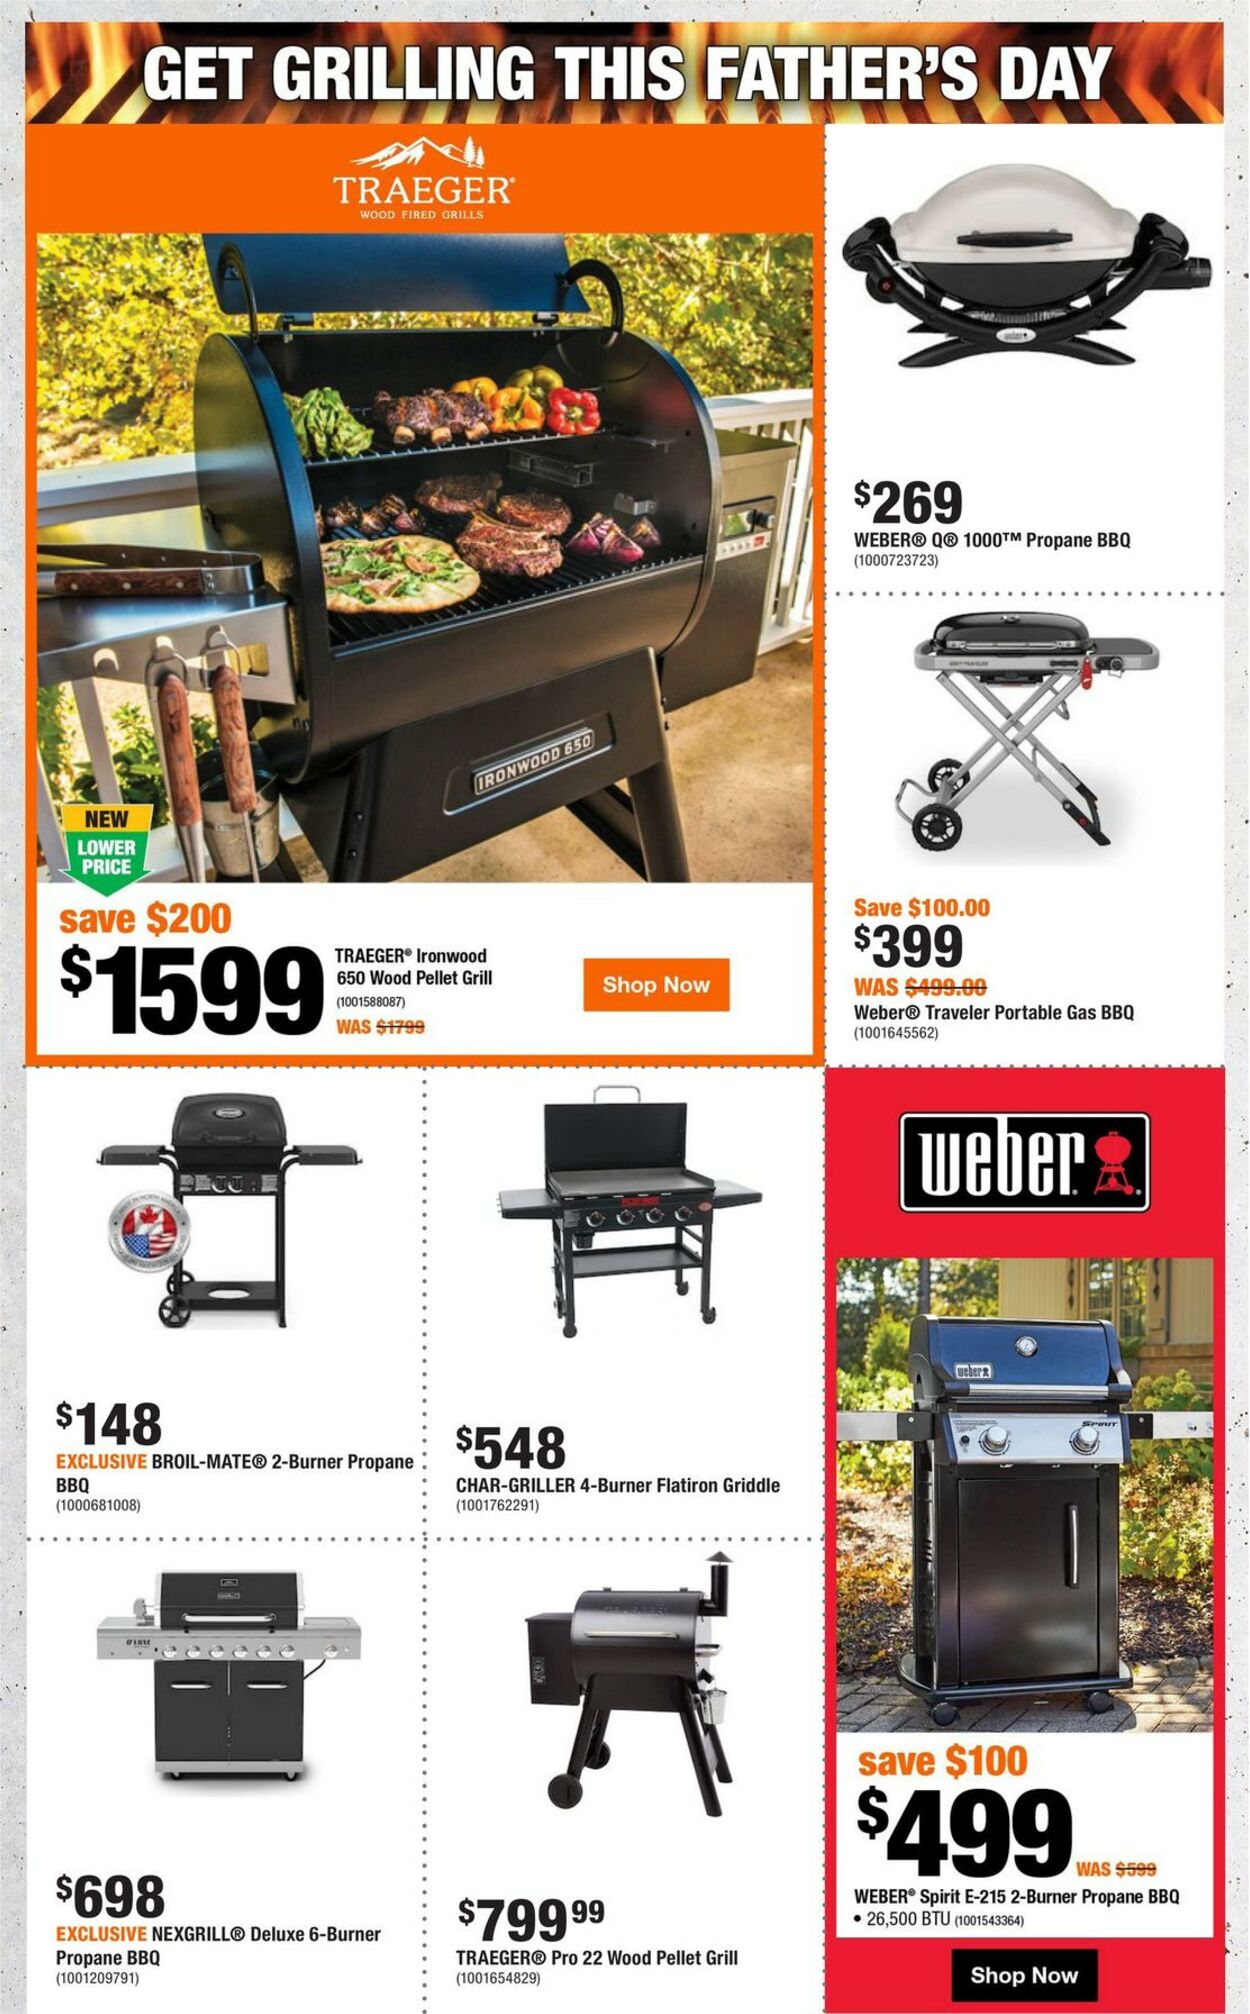 Home Depot Promotional Flyer Father's Day Valid from 15.06 to 21.06